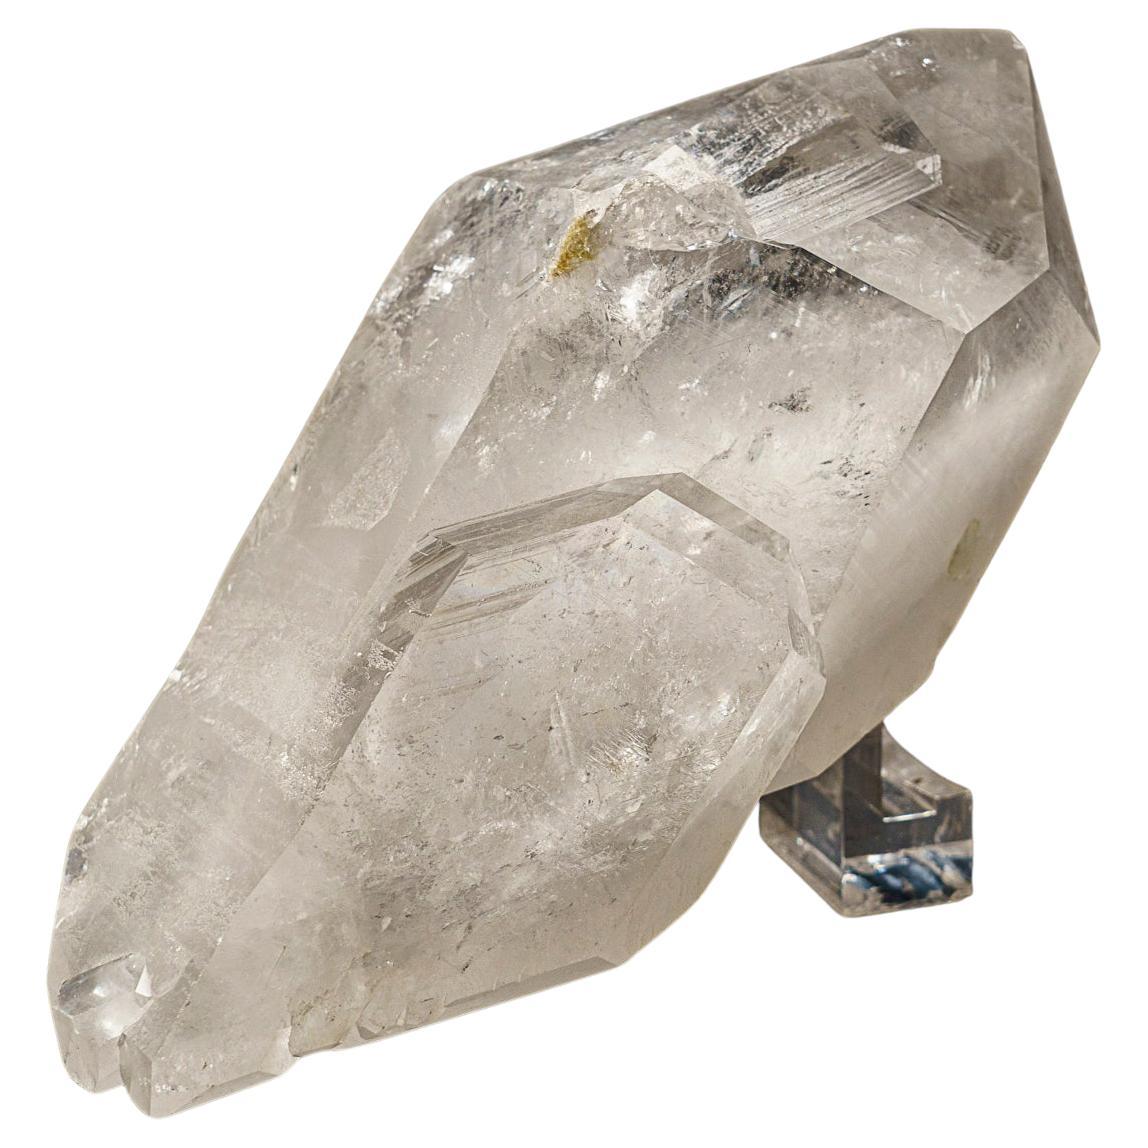 What is clear quartz used for?